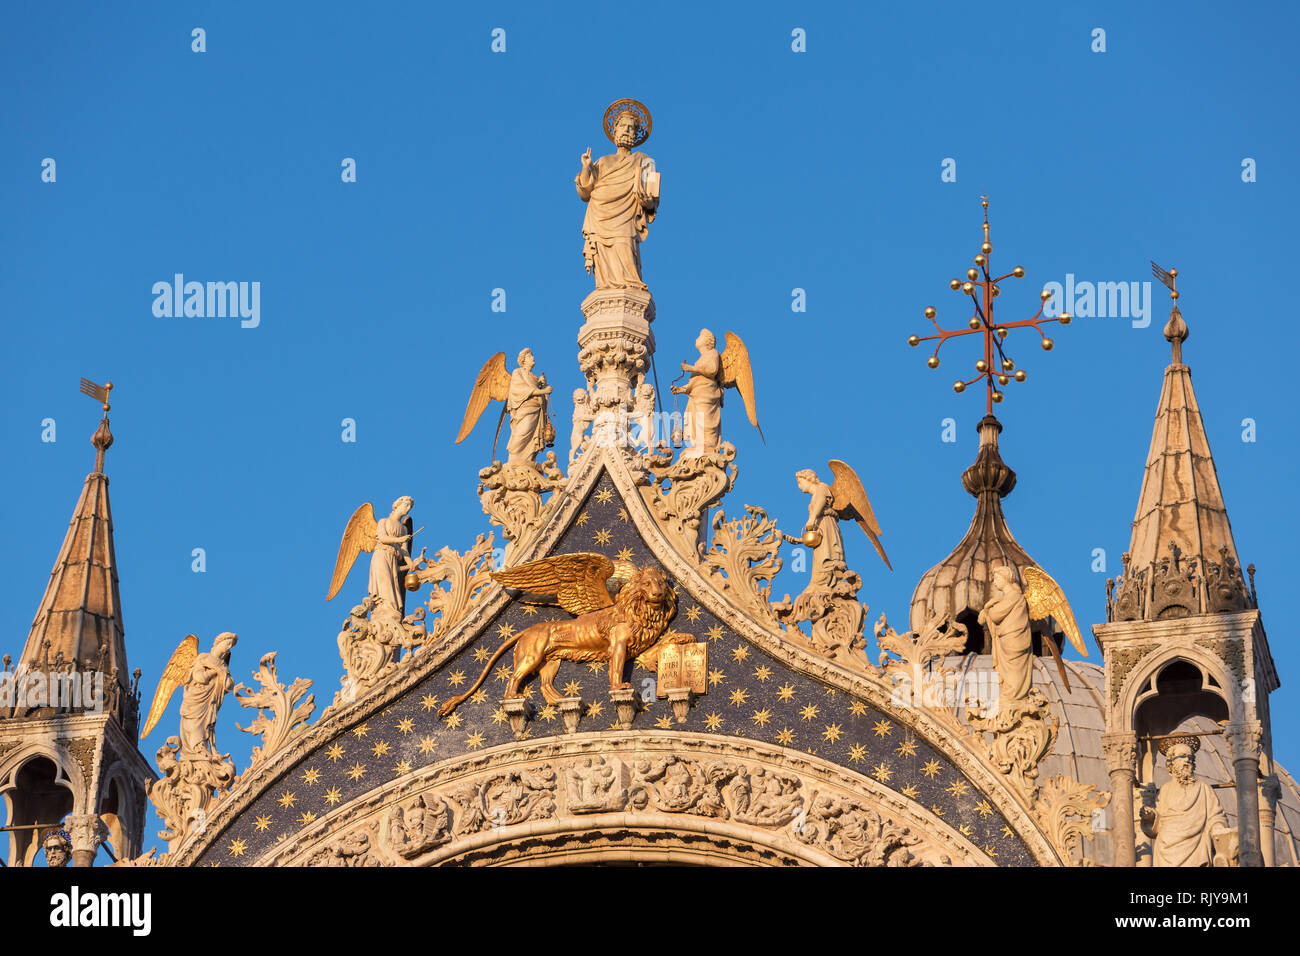 Architectural details of Basilica di San Marco in Venice, Italy Stock Photo